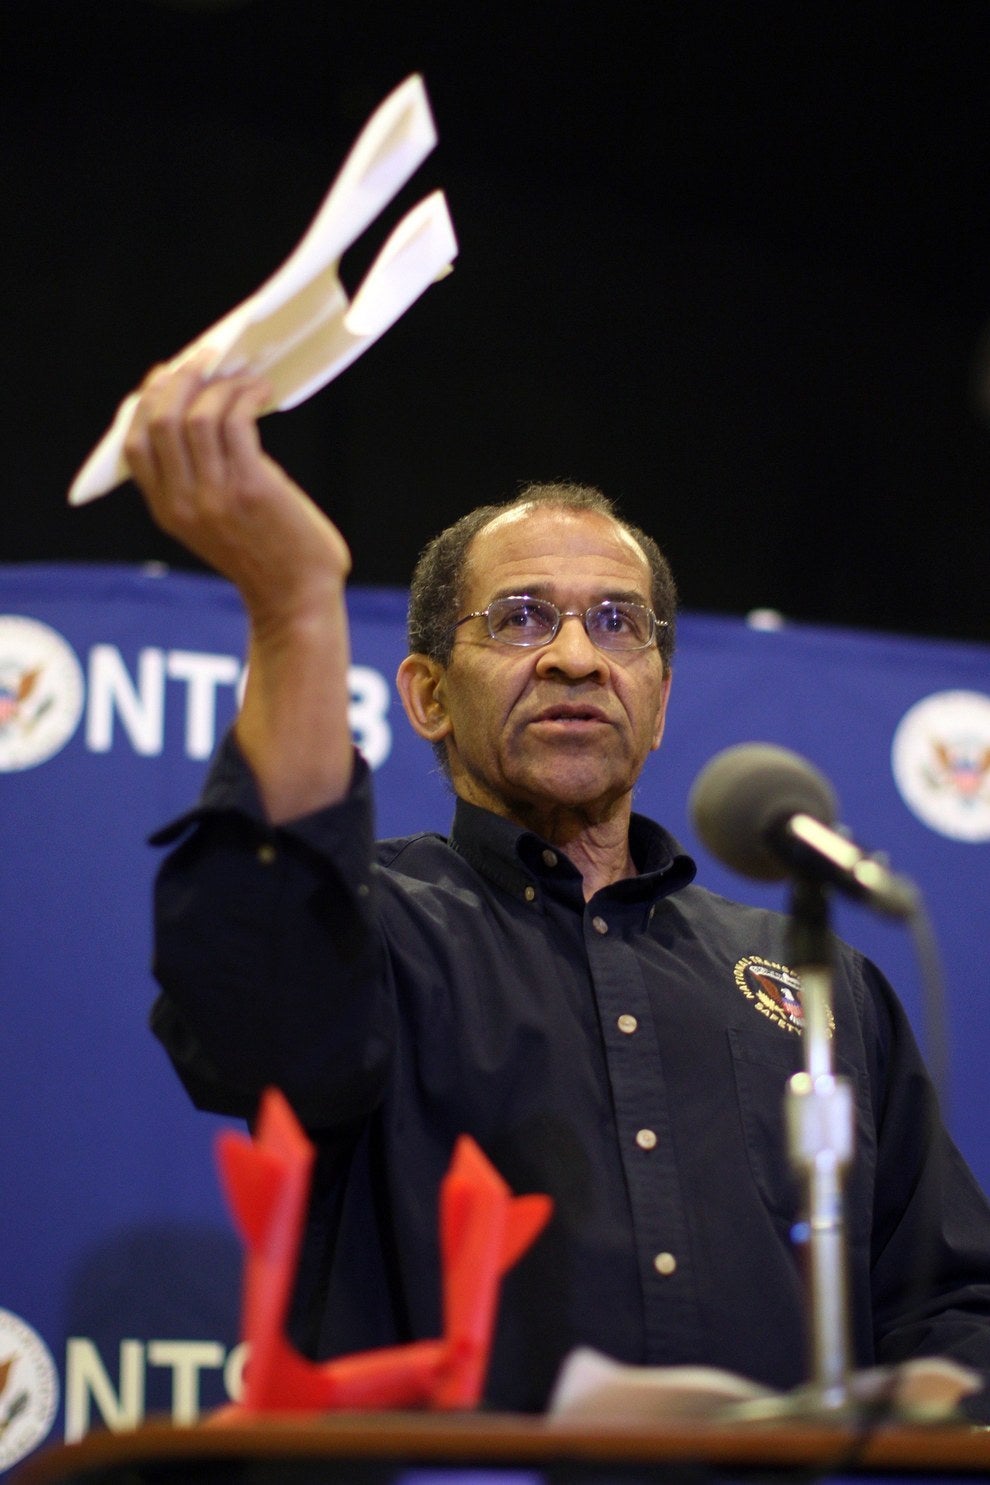 Christopher Hart, acting chairman of the National Transportation Safety Board (NTSB), uses a model during a news conference in Mojave, California.